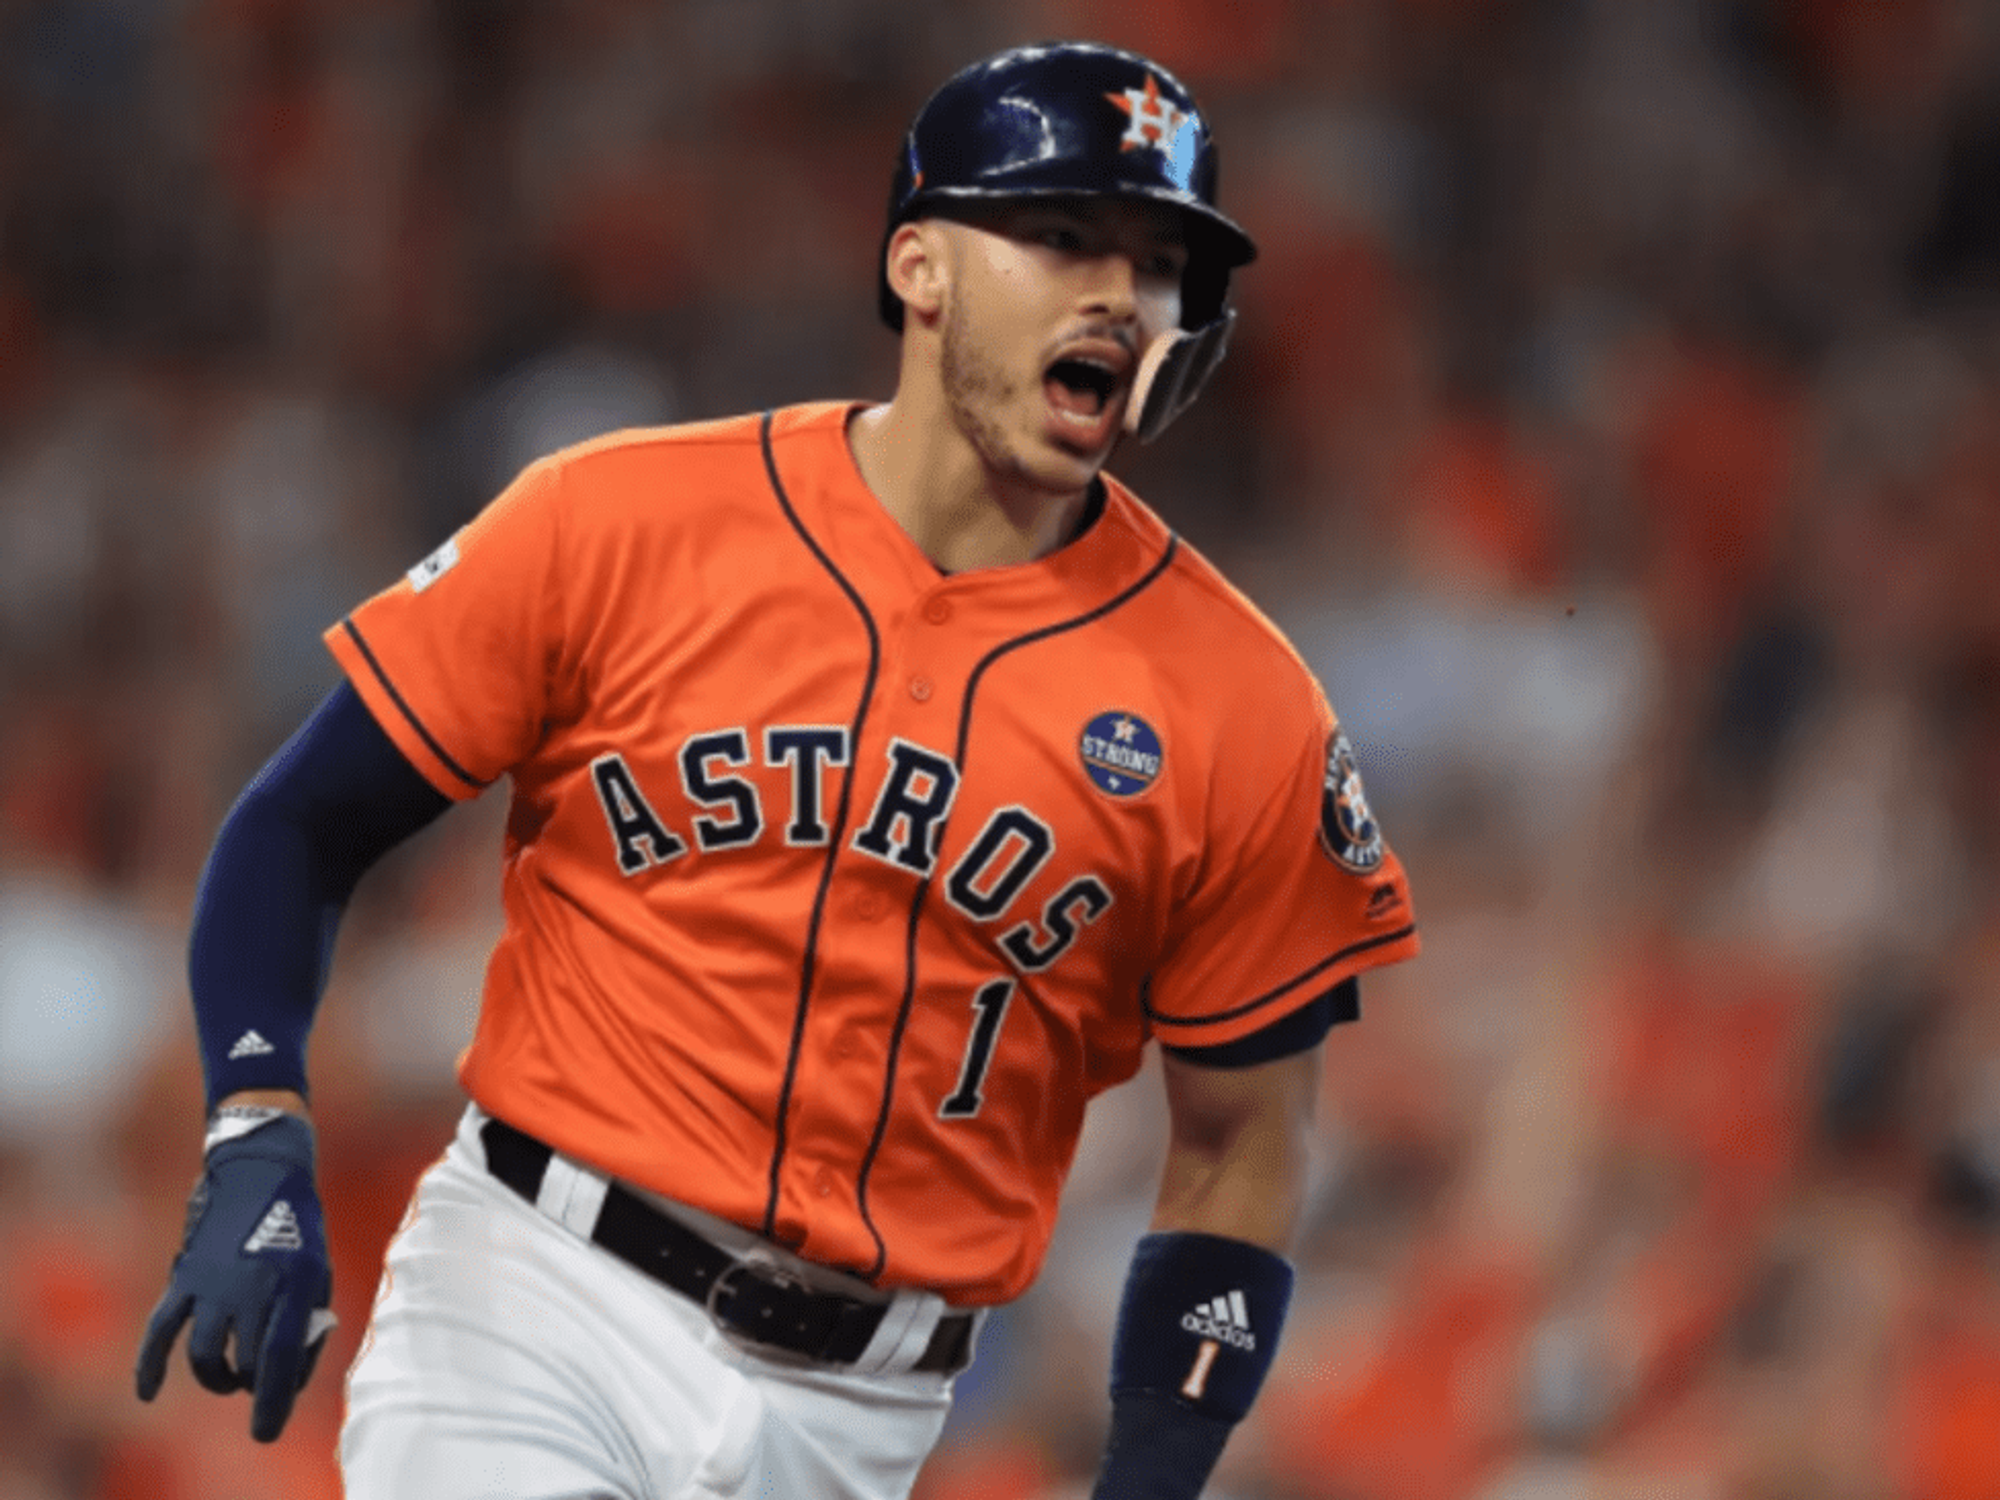 Correa leads hit parade as Astros crush Red Sox and take 2-0 series lead -  CultureMap Houston